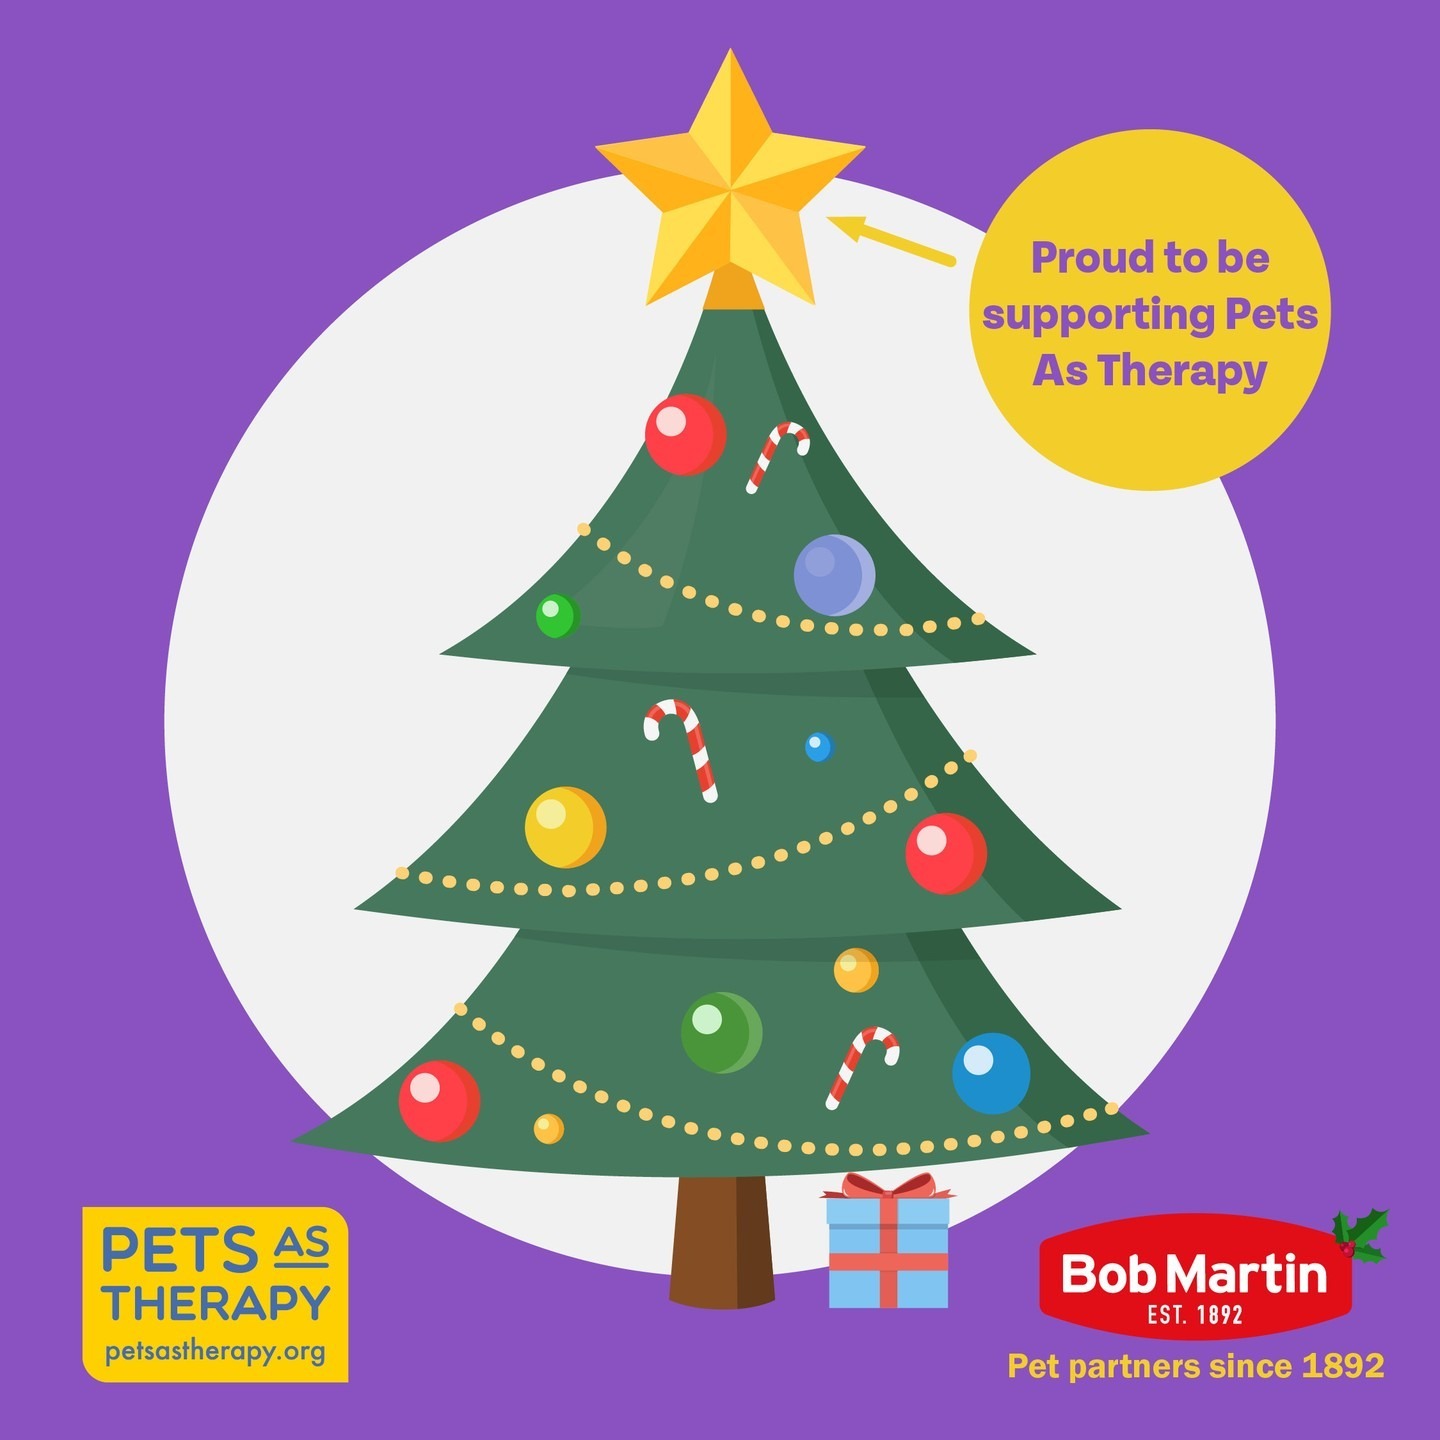 Every year our charity partner @petsastherapy_uk do a ‘Virtual Christmas Tree’ to raise funds and supporters can ‘sponsor’ a light, bauble, present etc. in exchange for a donation.

We are delighted to say that we have sponsored the star on the top of the tree and would welcome any of our followers who would like to support this fantastic charity, to do so via the link in our bio.

Pets As Therapy is a national charity providing temperament-assessed therapy animals via a nationwide network of volunteers, enhancing the health and wellbeing in the community through its visiting service within schools, hospitals and care homes.

.
.
.
#BobMartin #PetHealthcare #Flea #Worm #Dog #Cat #SpotOn #Pets #PetsOfInstagram #PetCare #PetTips #PetHealth #HealthyPets #ActivePets #TherapyDog #PetsAsTherapy #DogLovers #Volunteer